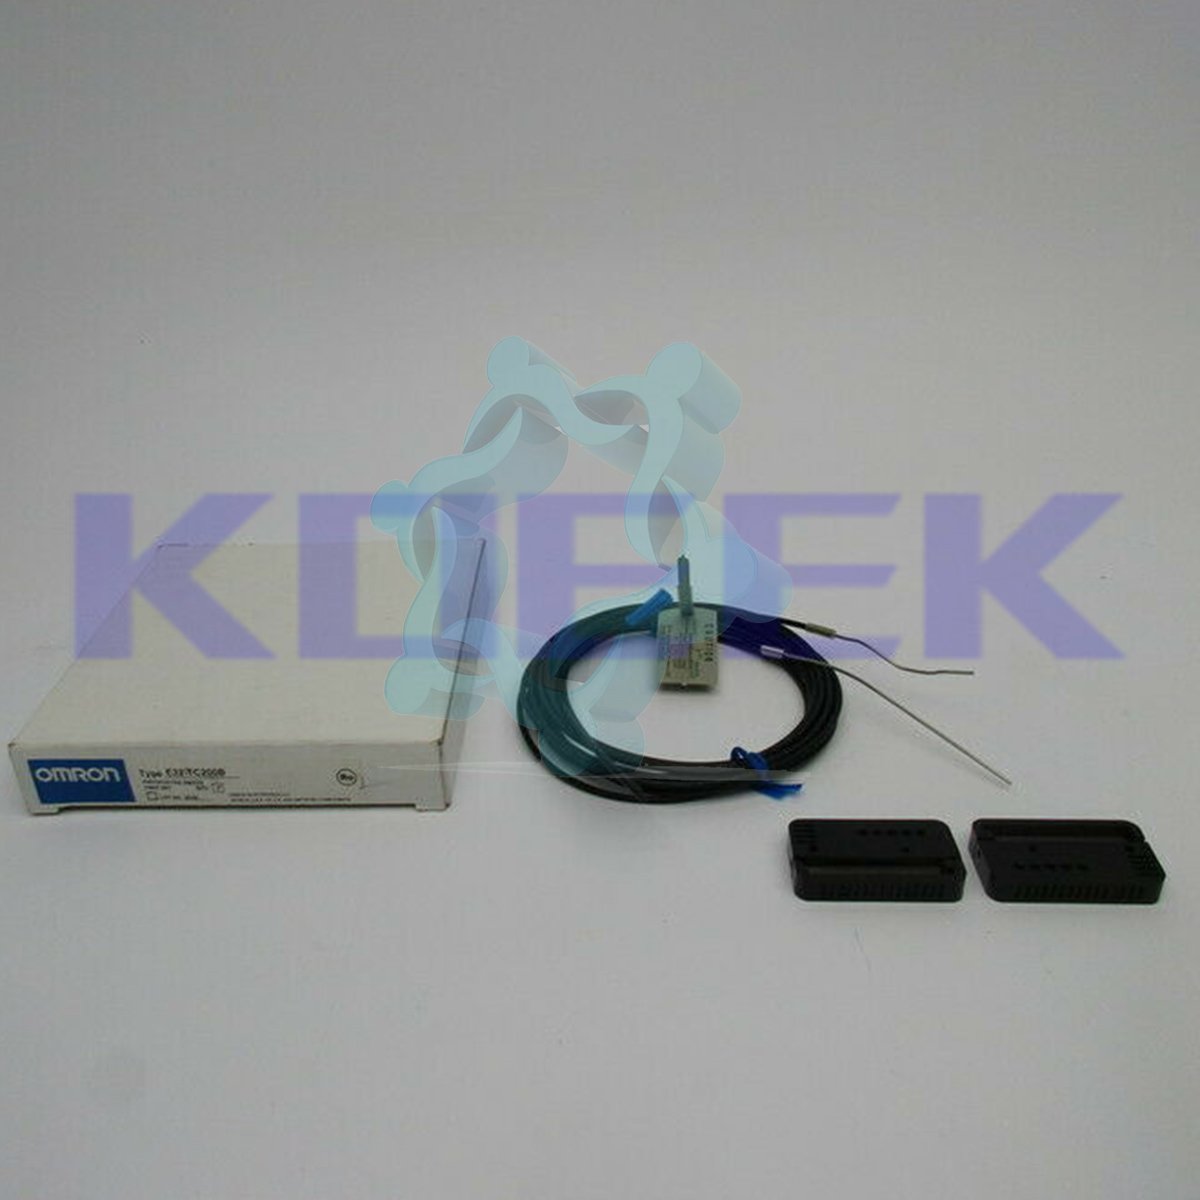 E32-TC200B KOEED 1, 80%, import_2020_10_10_031751, Omron, Other